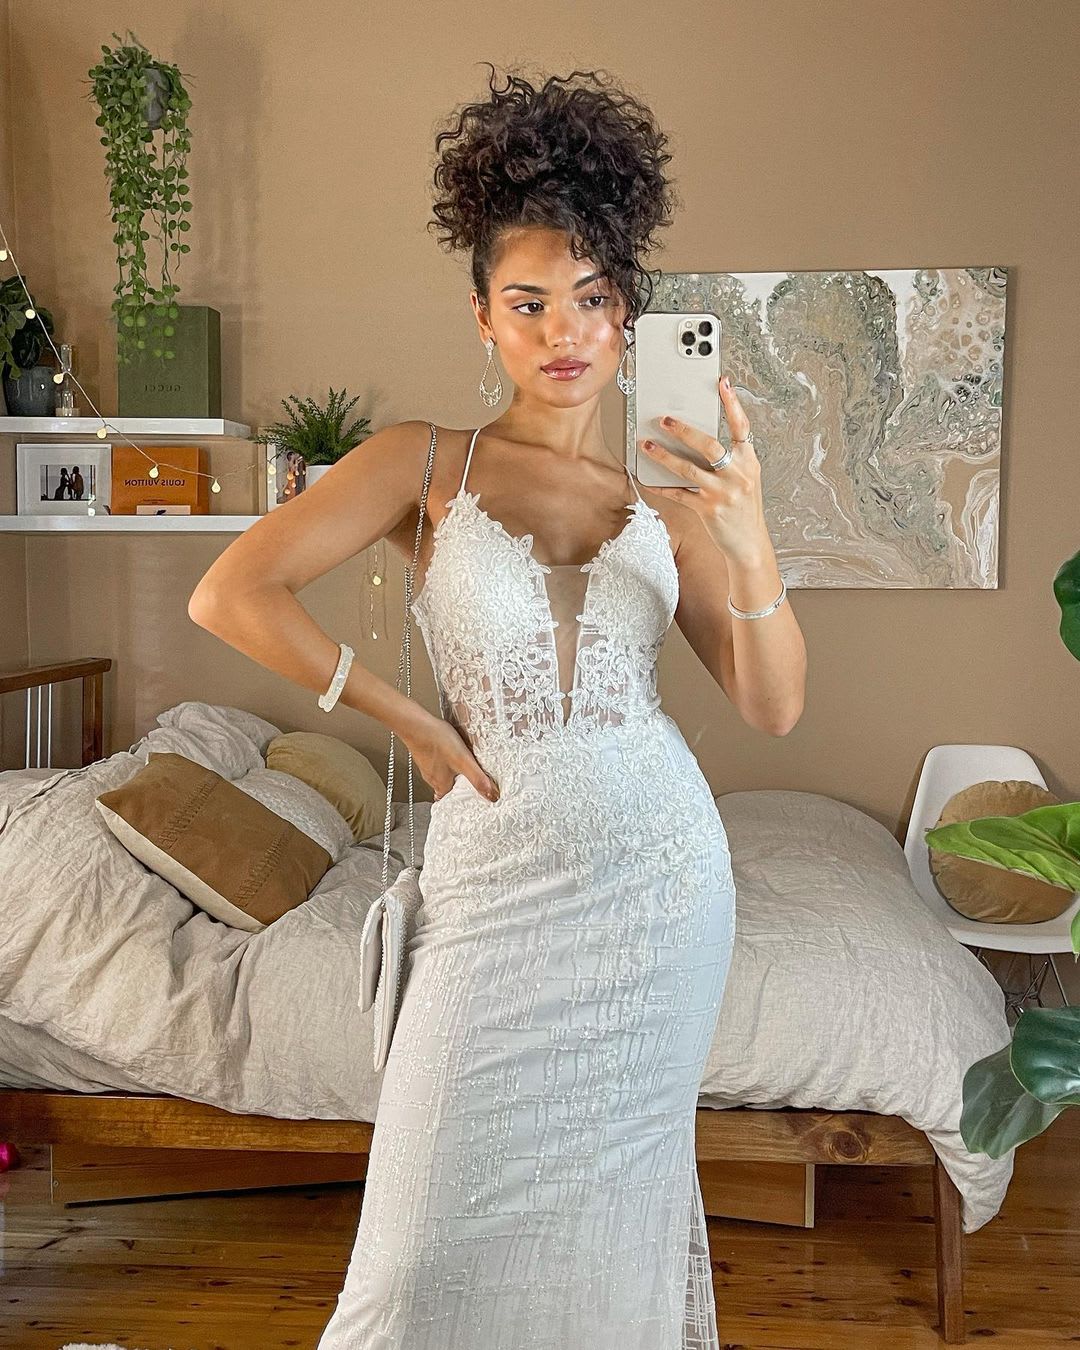 Unique Prom Dresses For A Showstopping Look - Lulus.com Fashion Blog